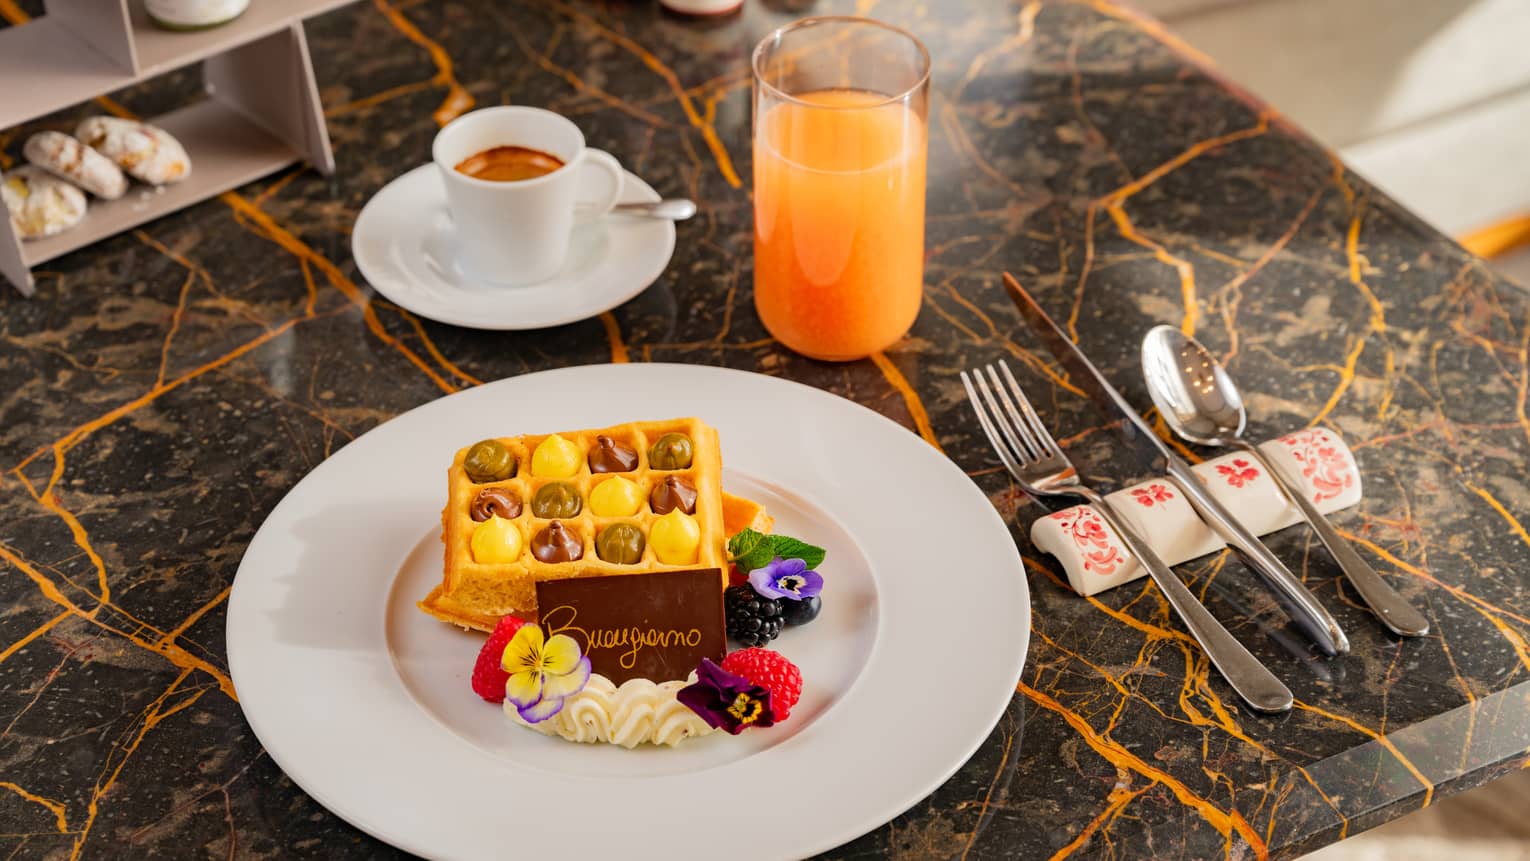 Waffle filled with cream and garnished with chocolate, pansies and mixed berries on white plate beside flatware, cup of espresso and glass of juice